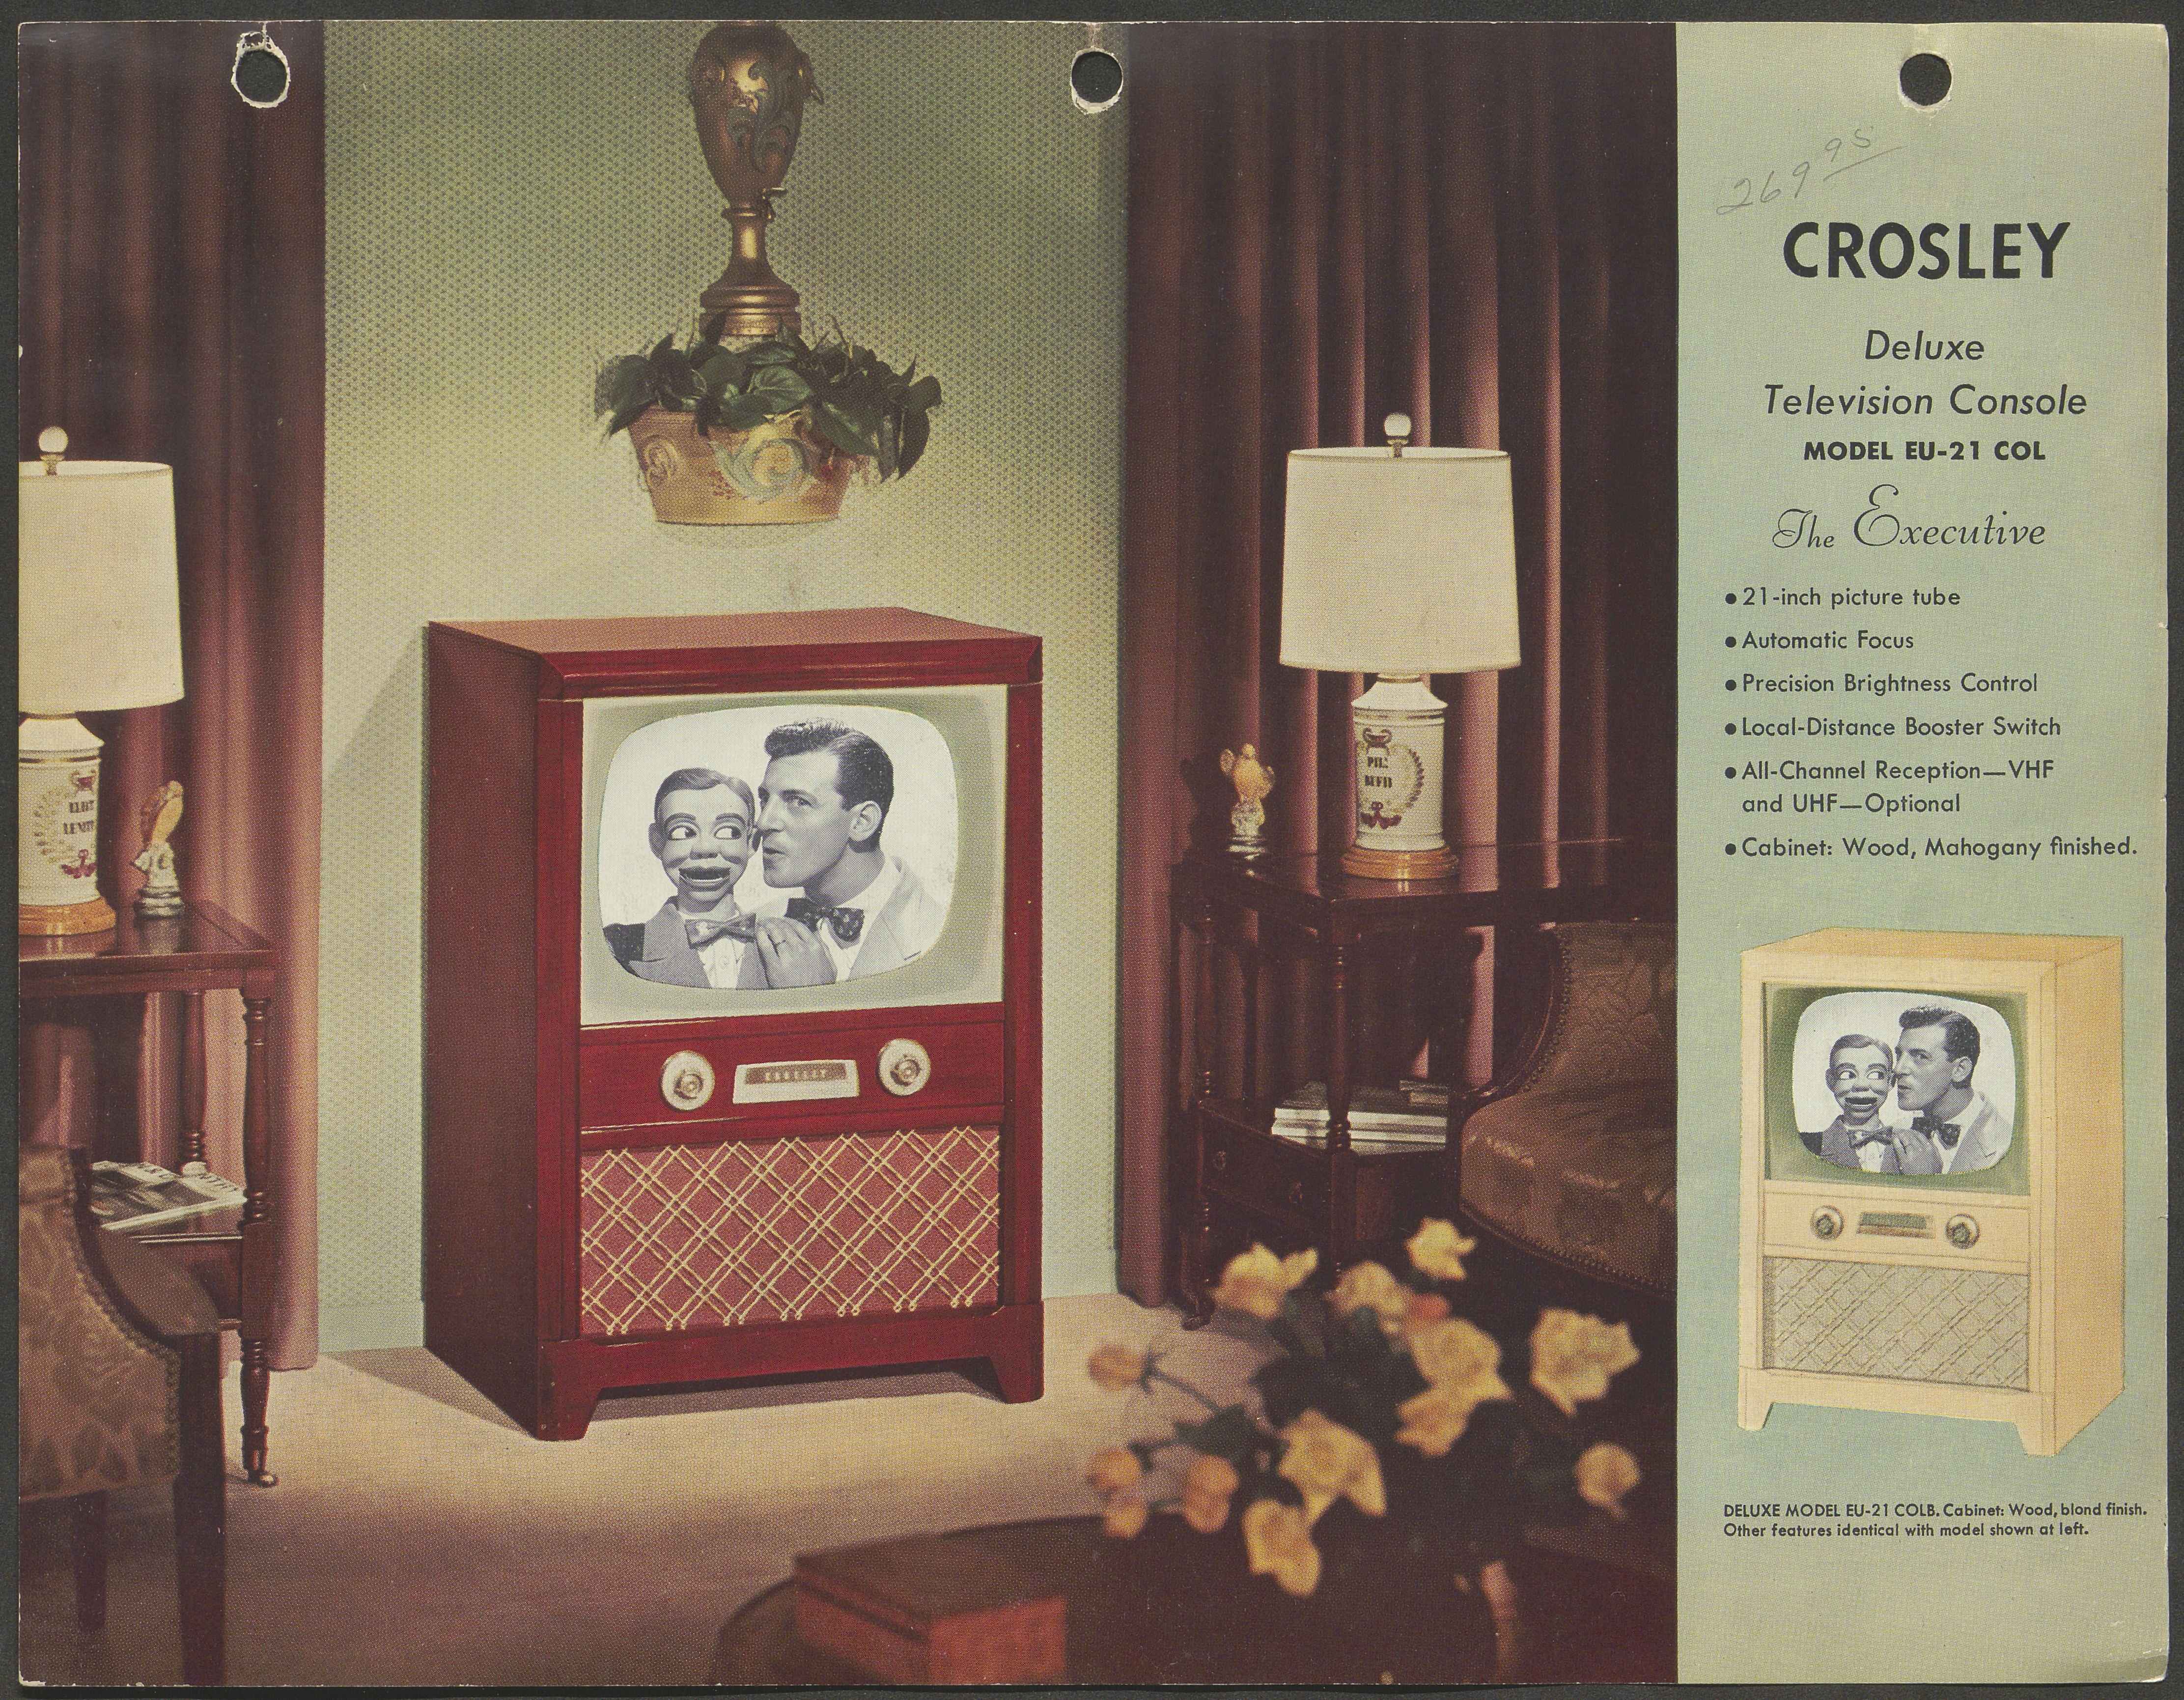 Color advertisement showing a Crosley television control in a 1950s living room